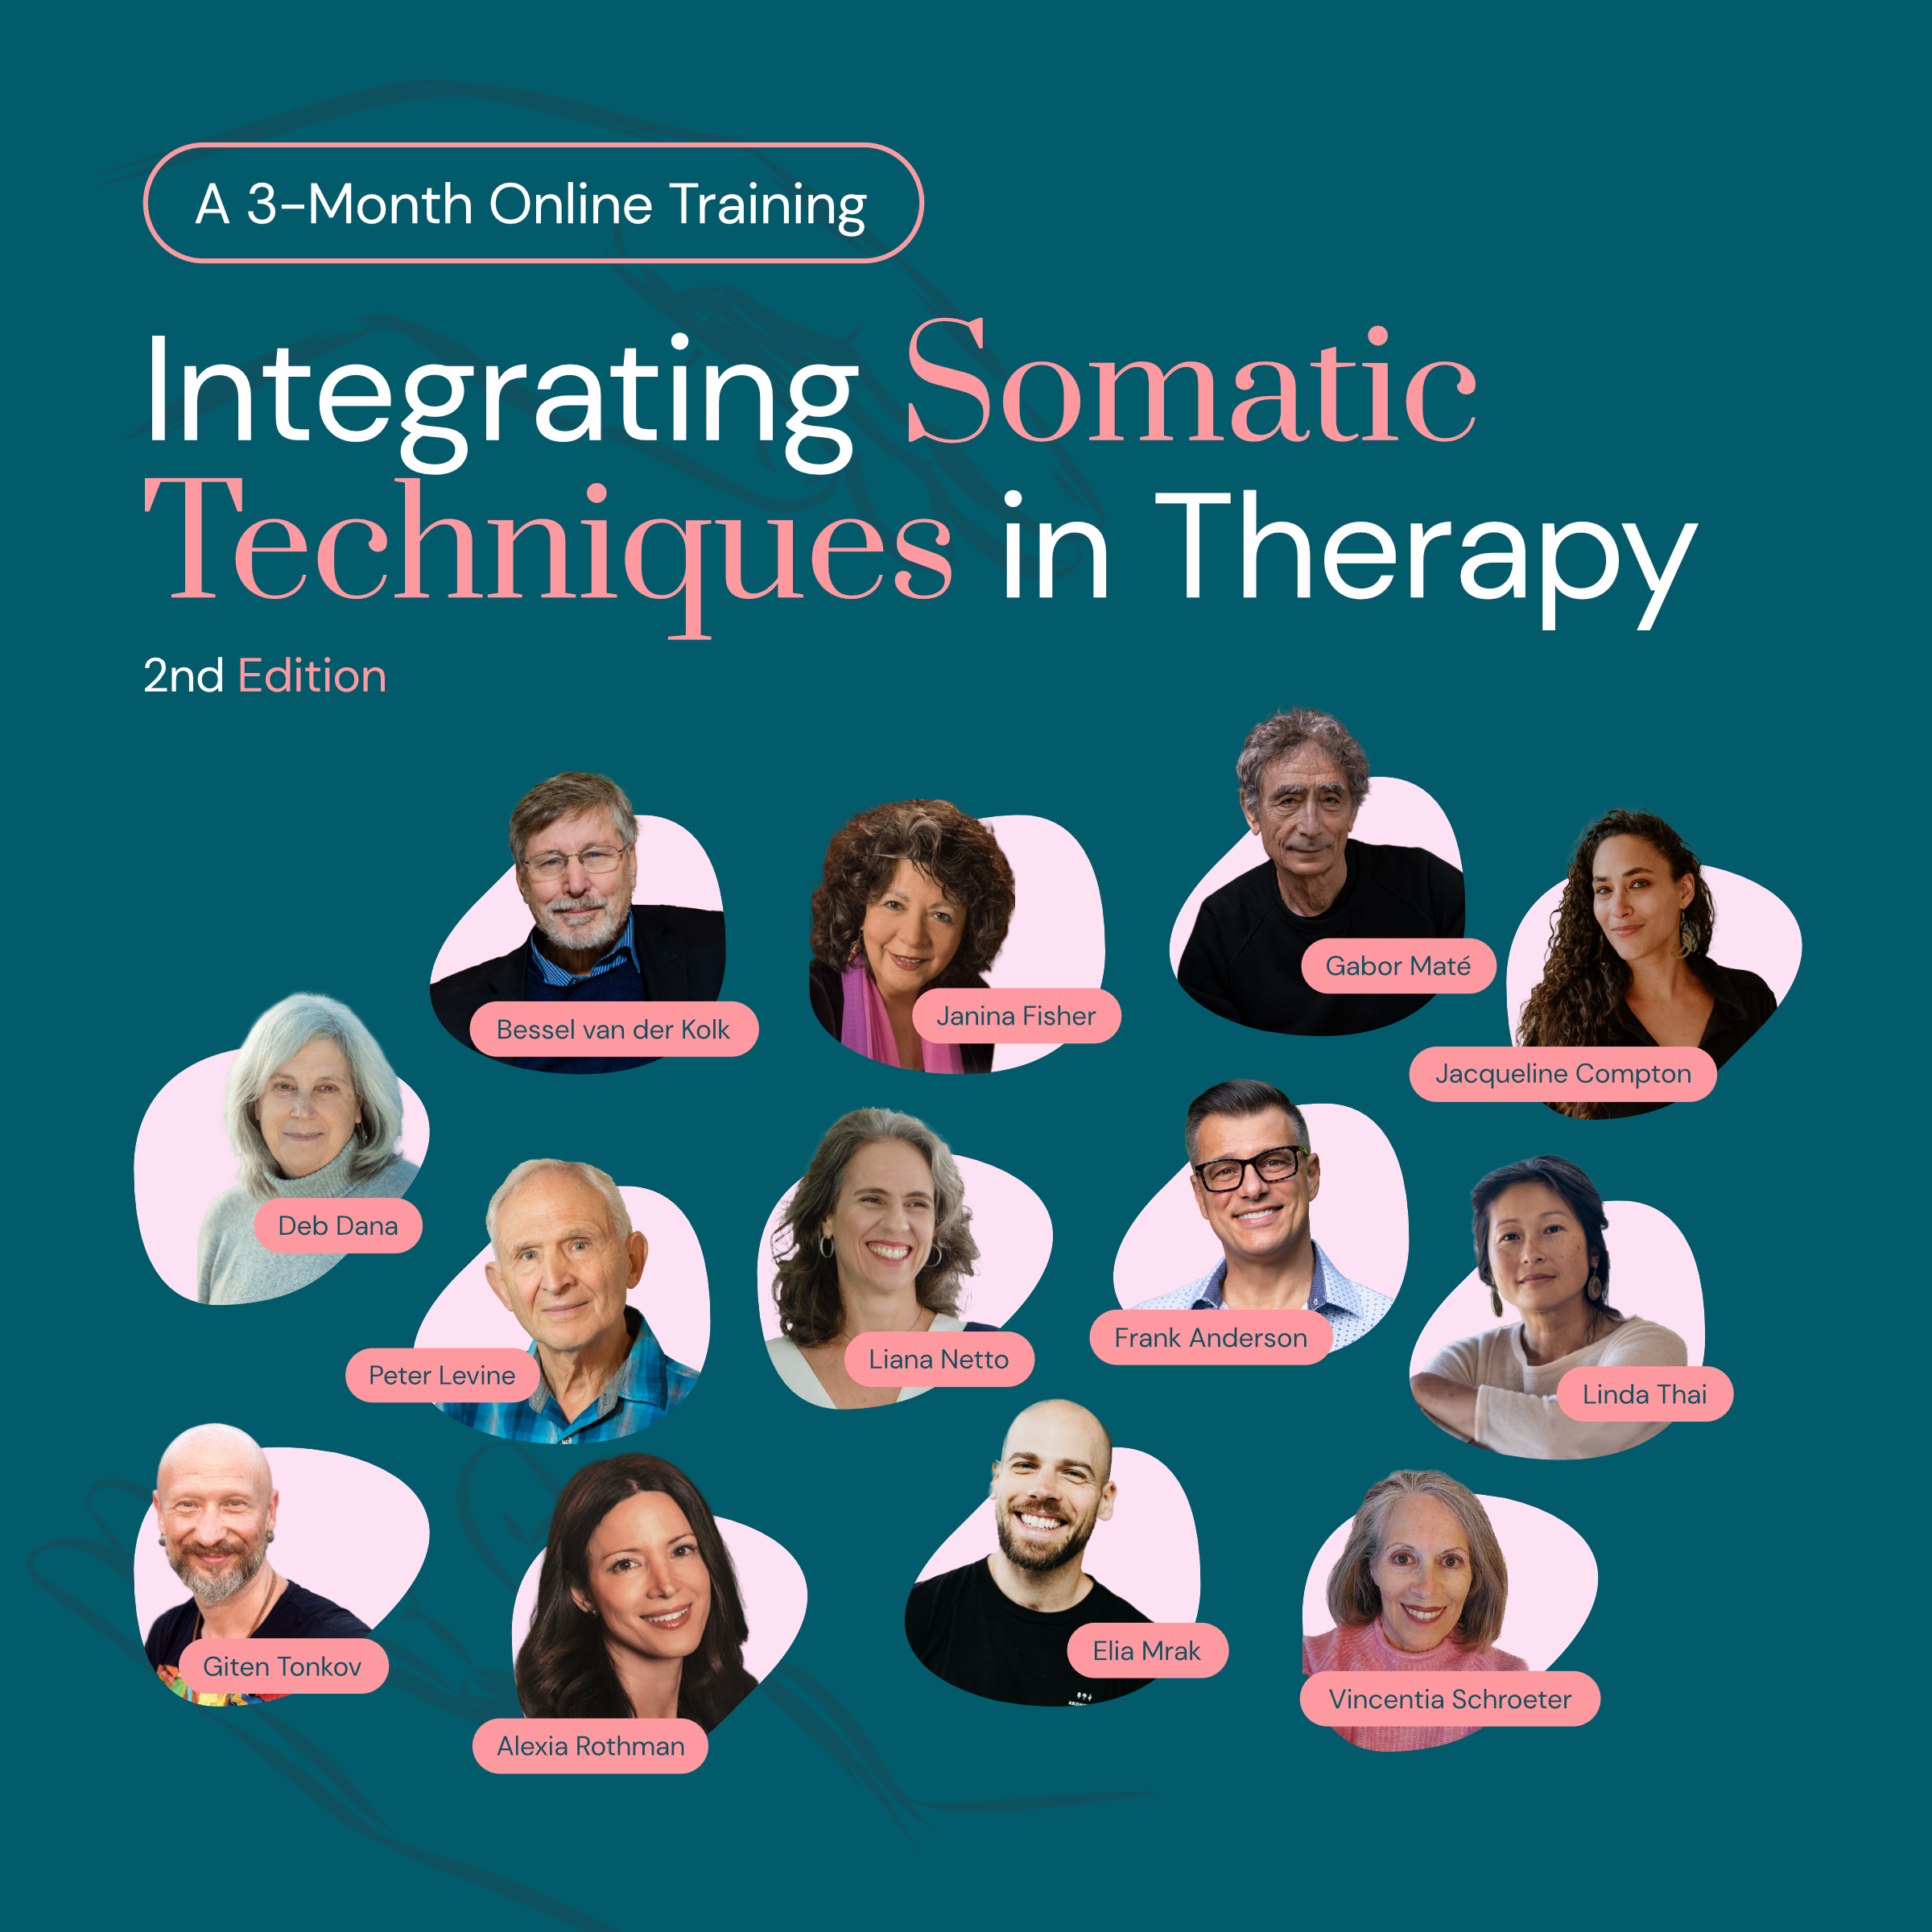 Integrating Somatic Techniques in Therapy